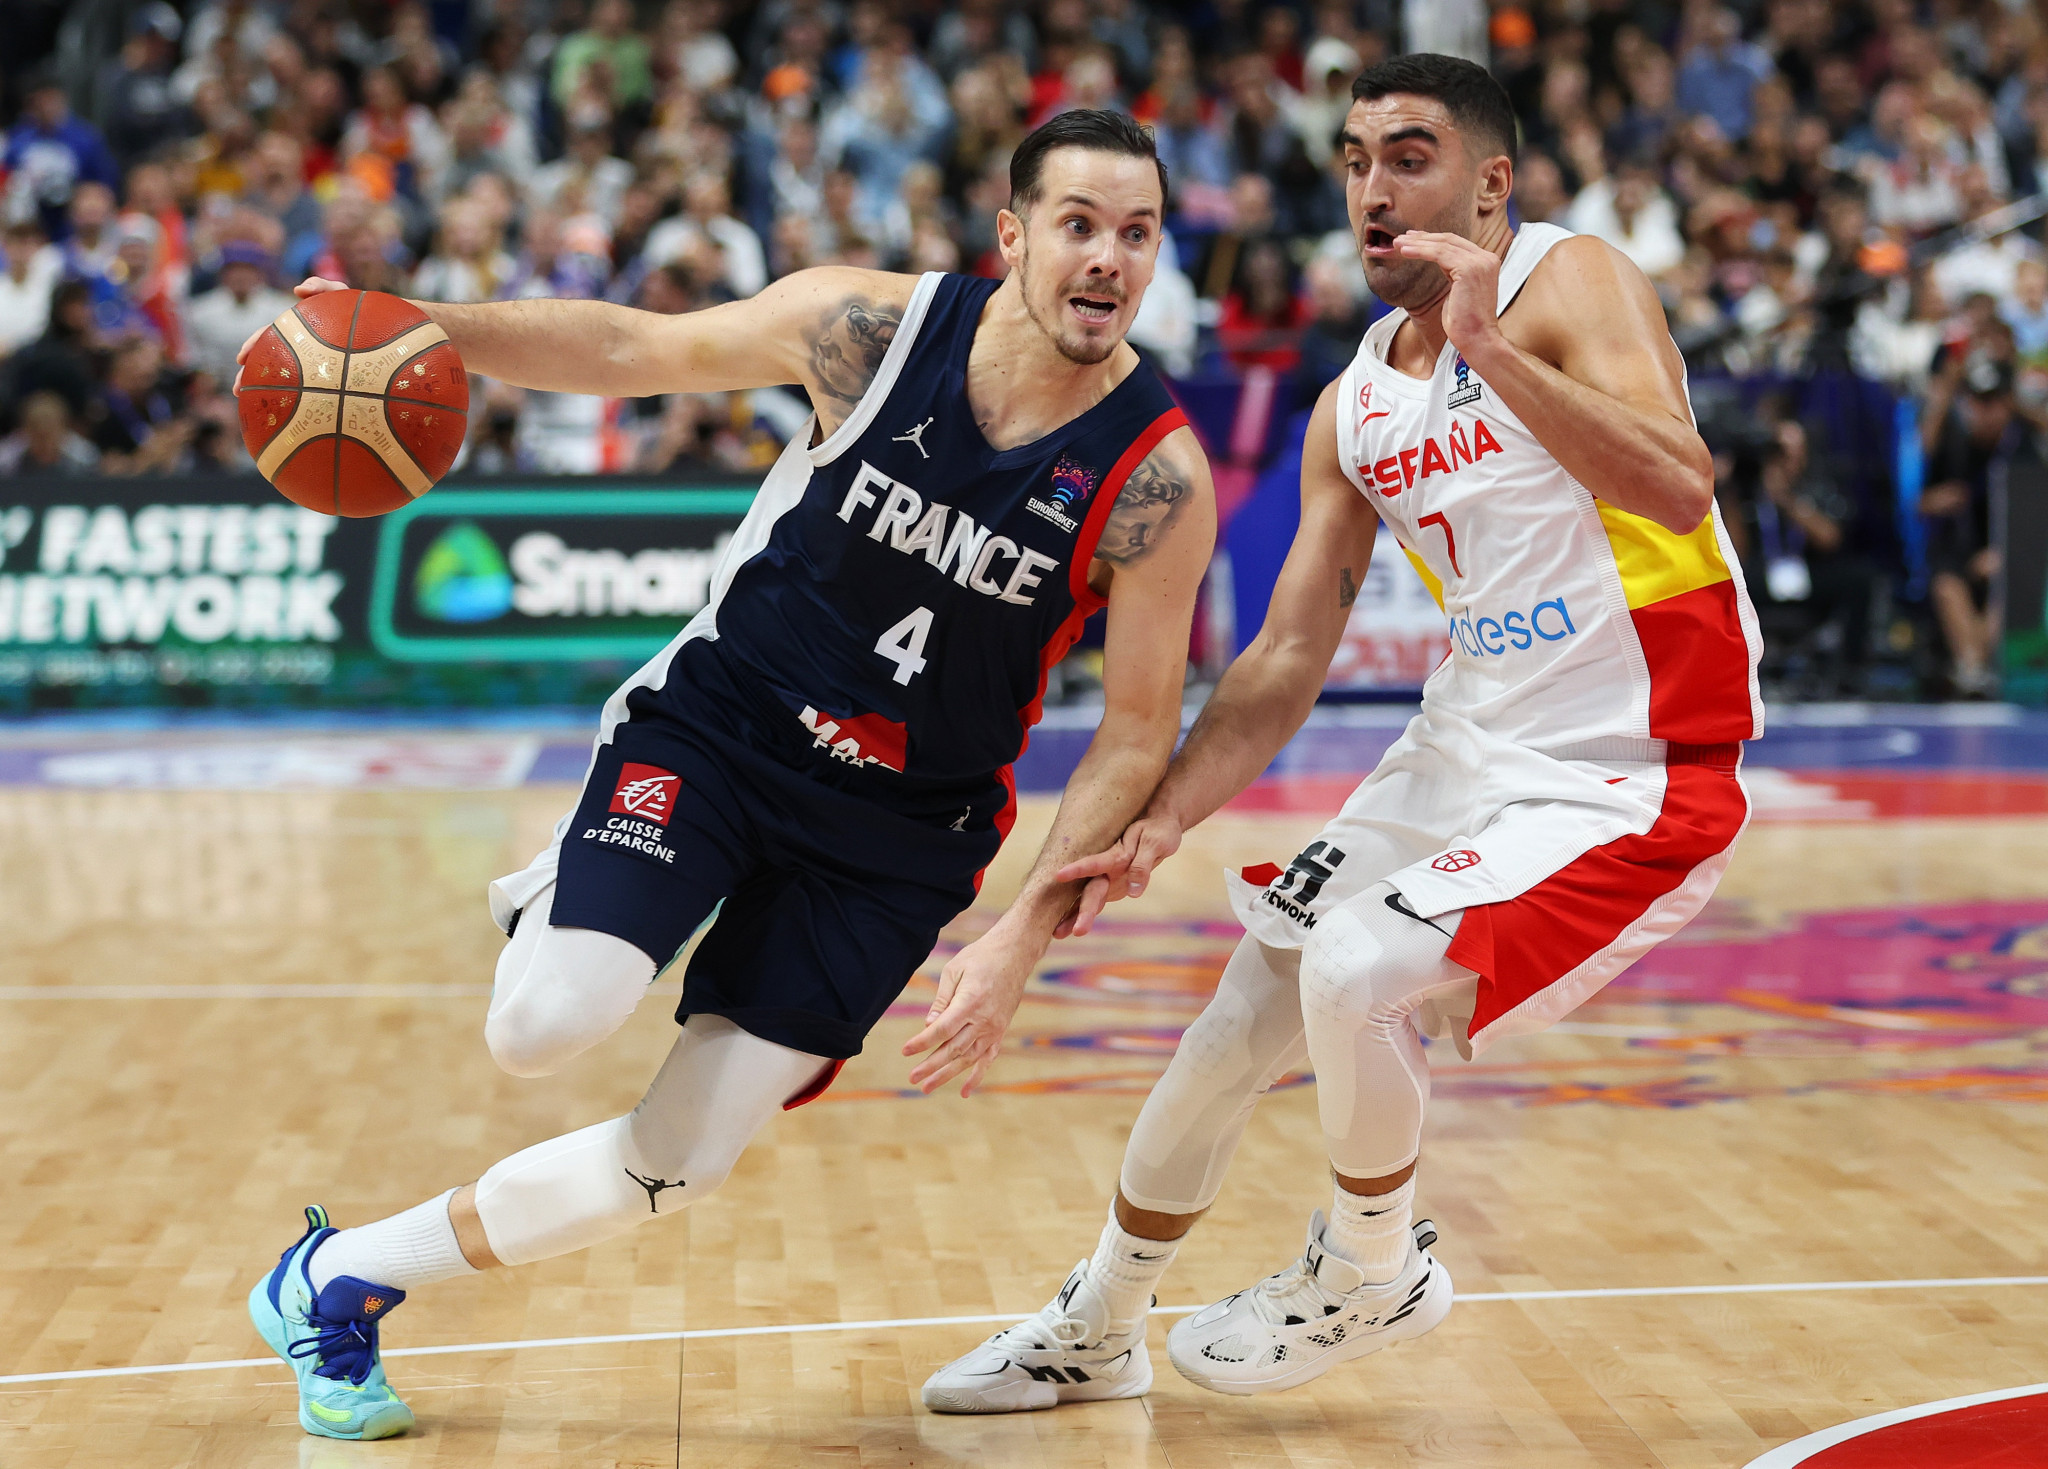 French basketball player Heurtel set to be ruled out of Paris 2024 over Russia move